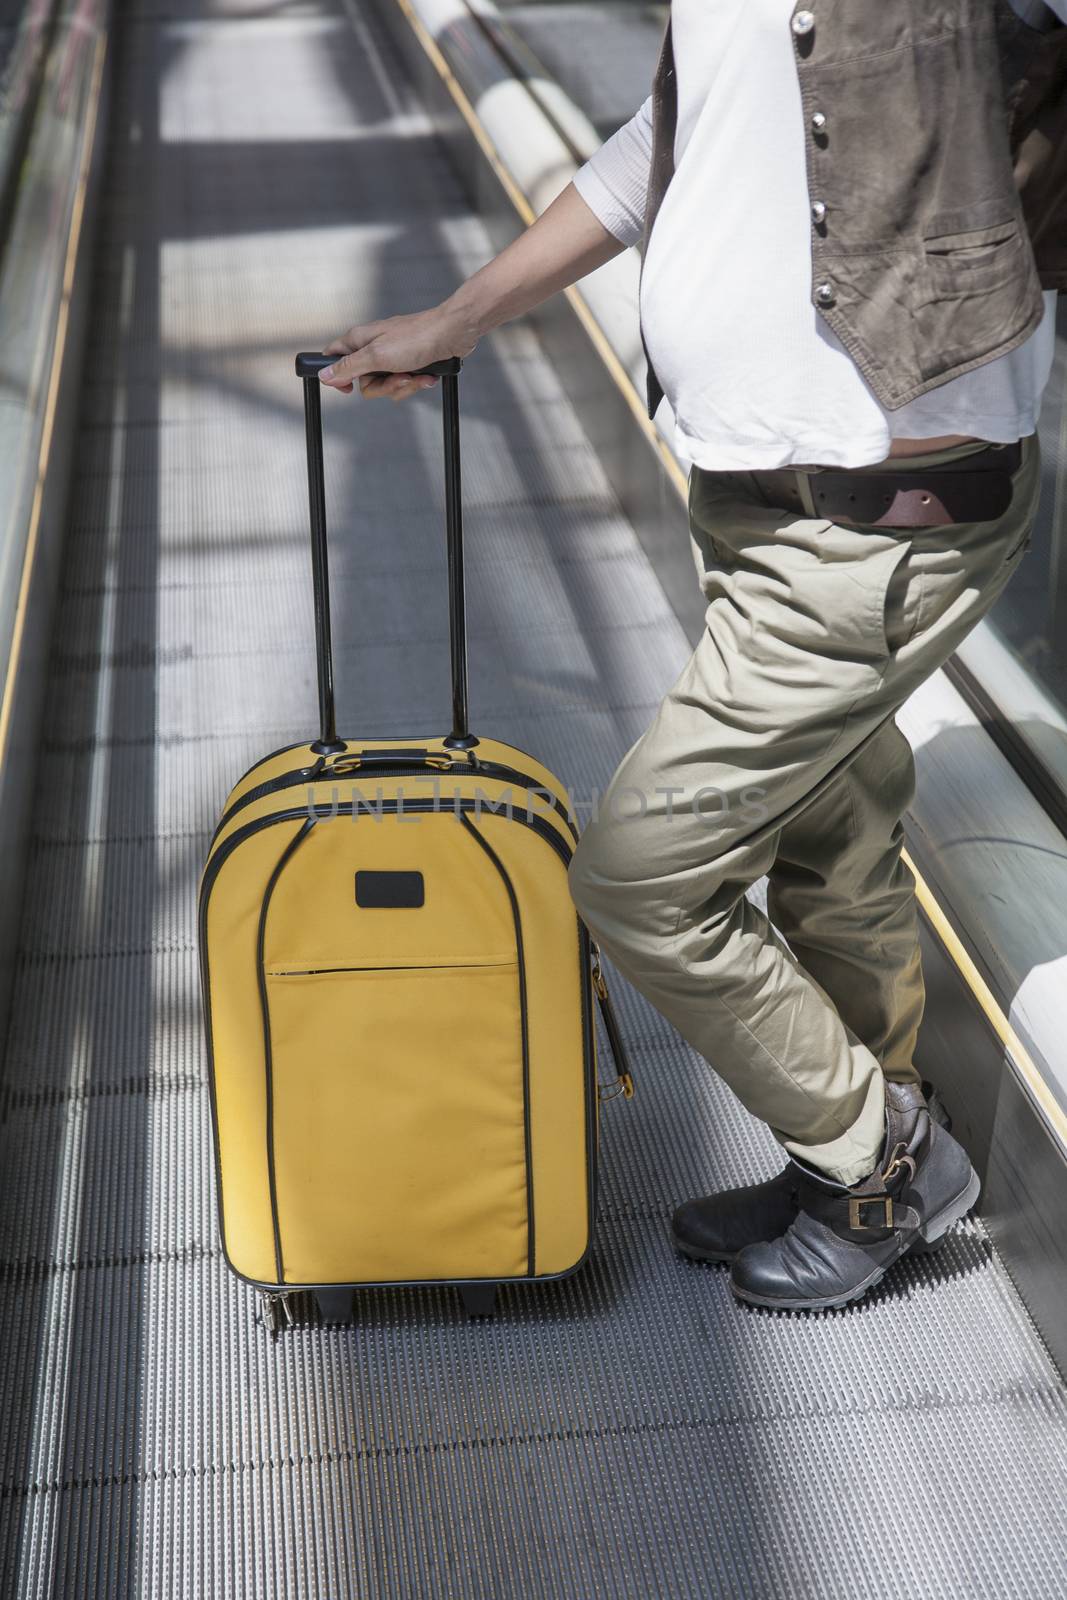 woman pregnant with yellow suitcase standing at walkway